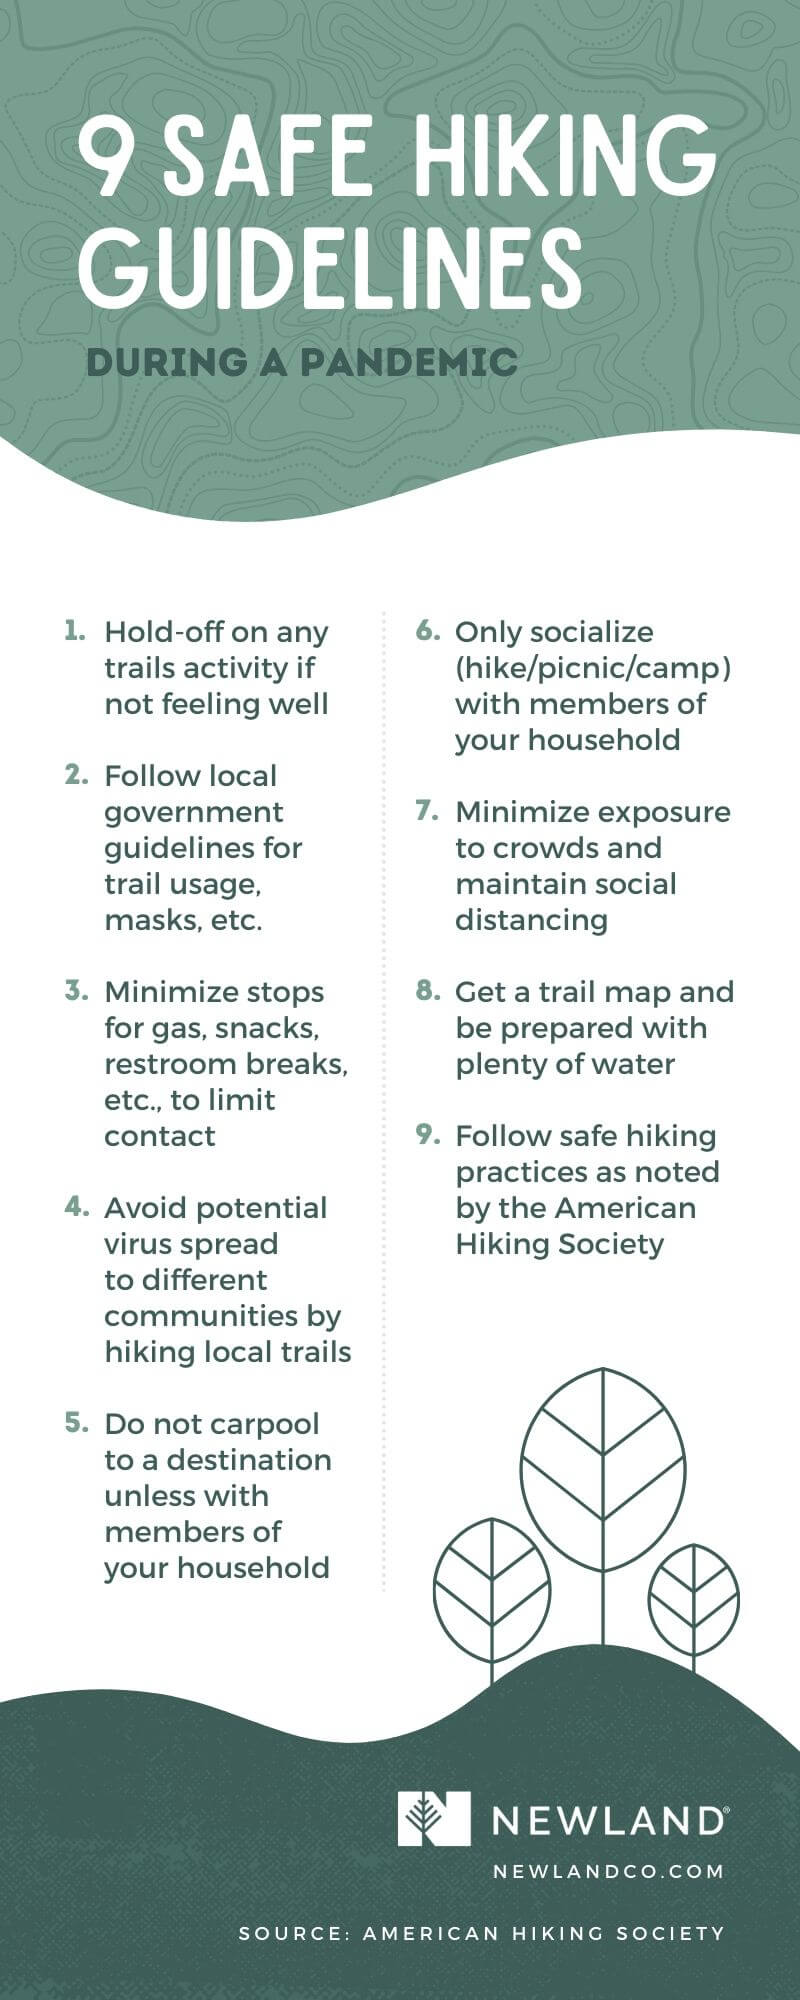 Infographic on hiking safety guidelines during a pandemic.